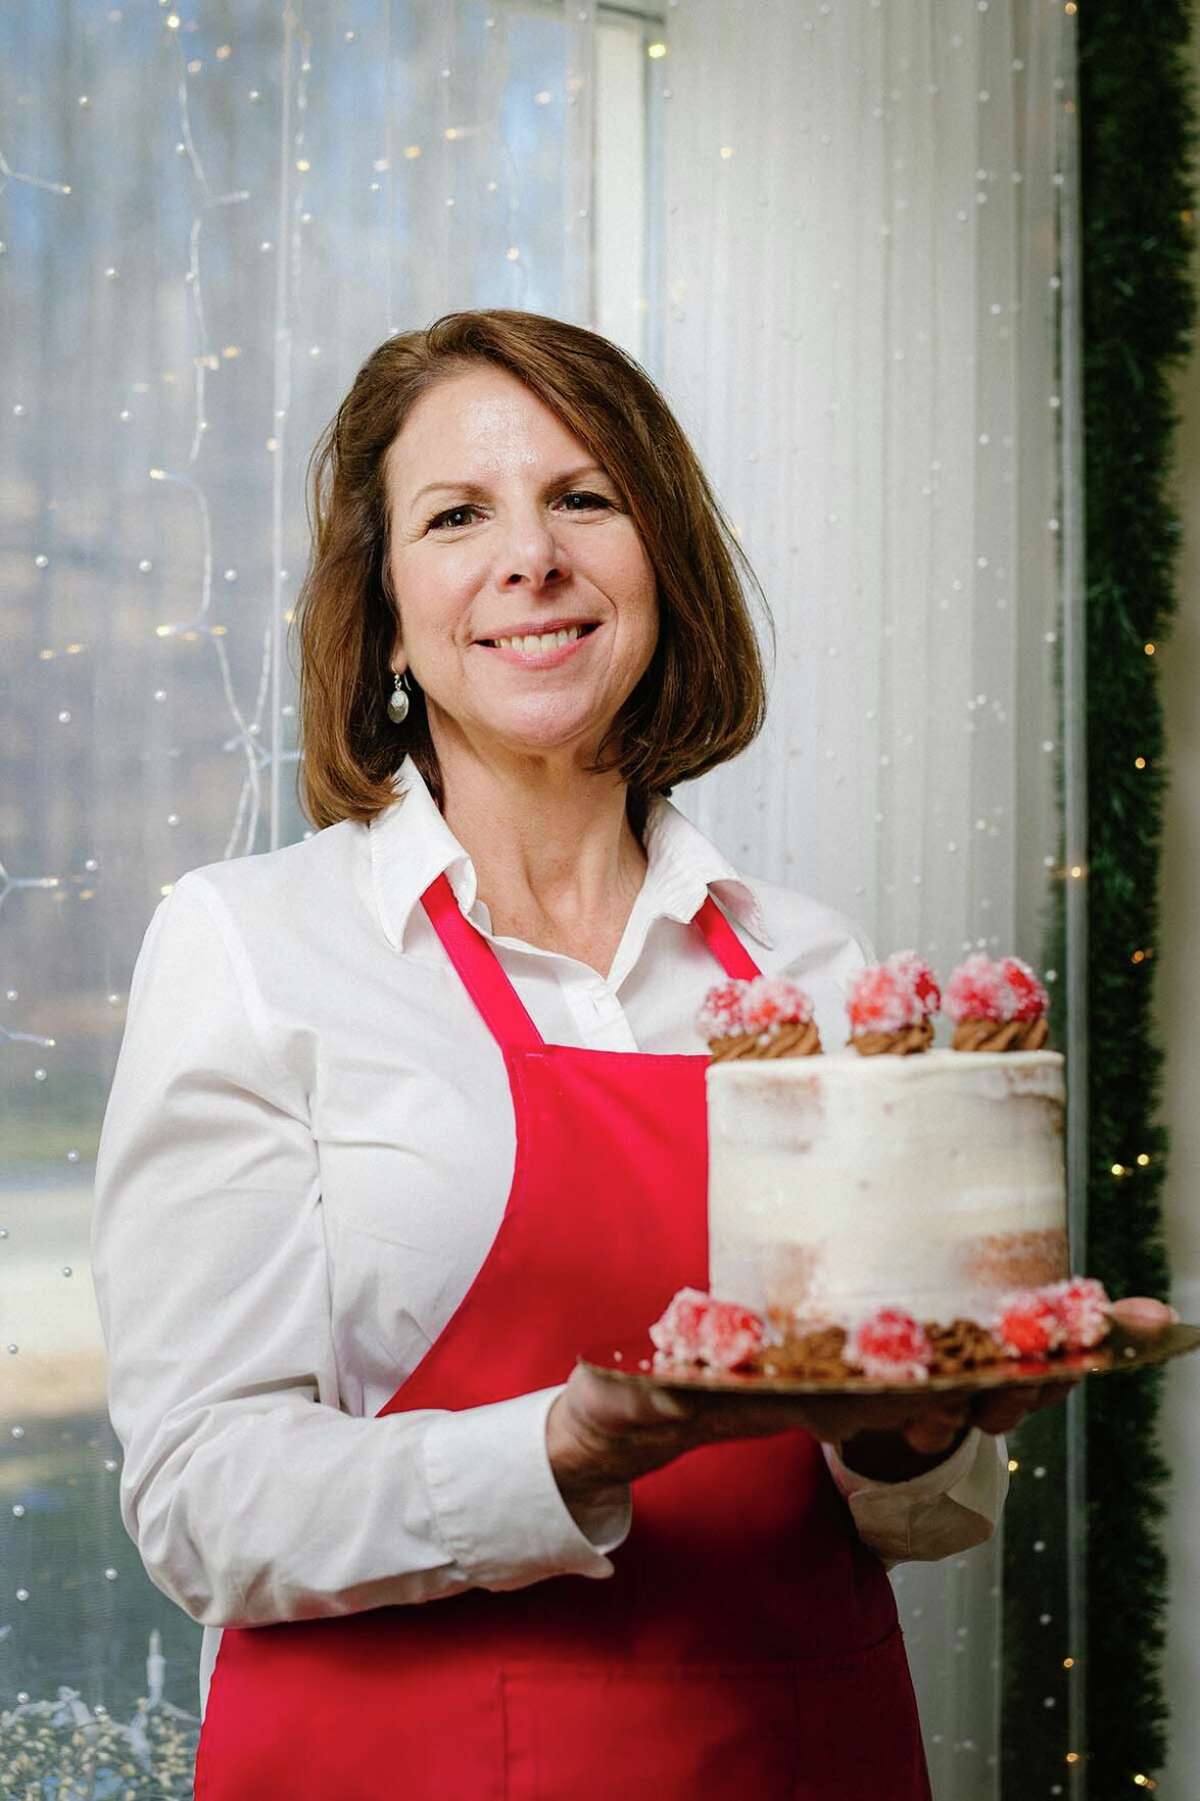 Kim Terrill, owner of Kim’s Cottage Confections